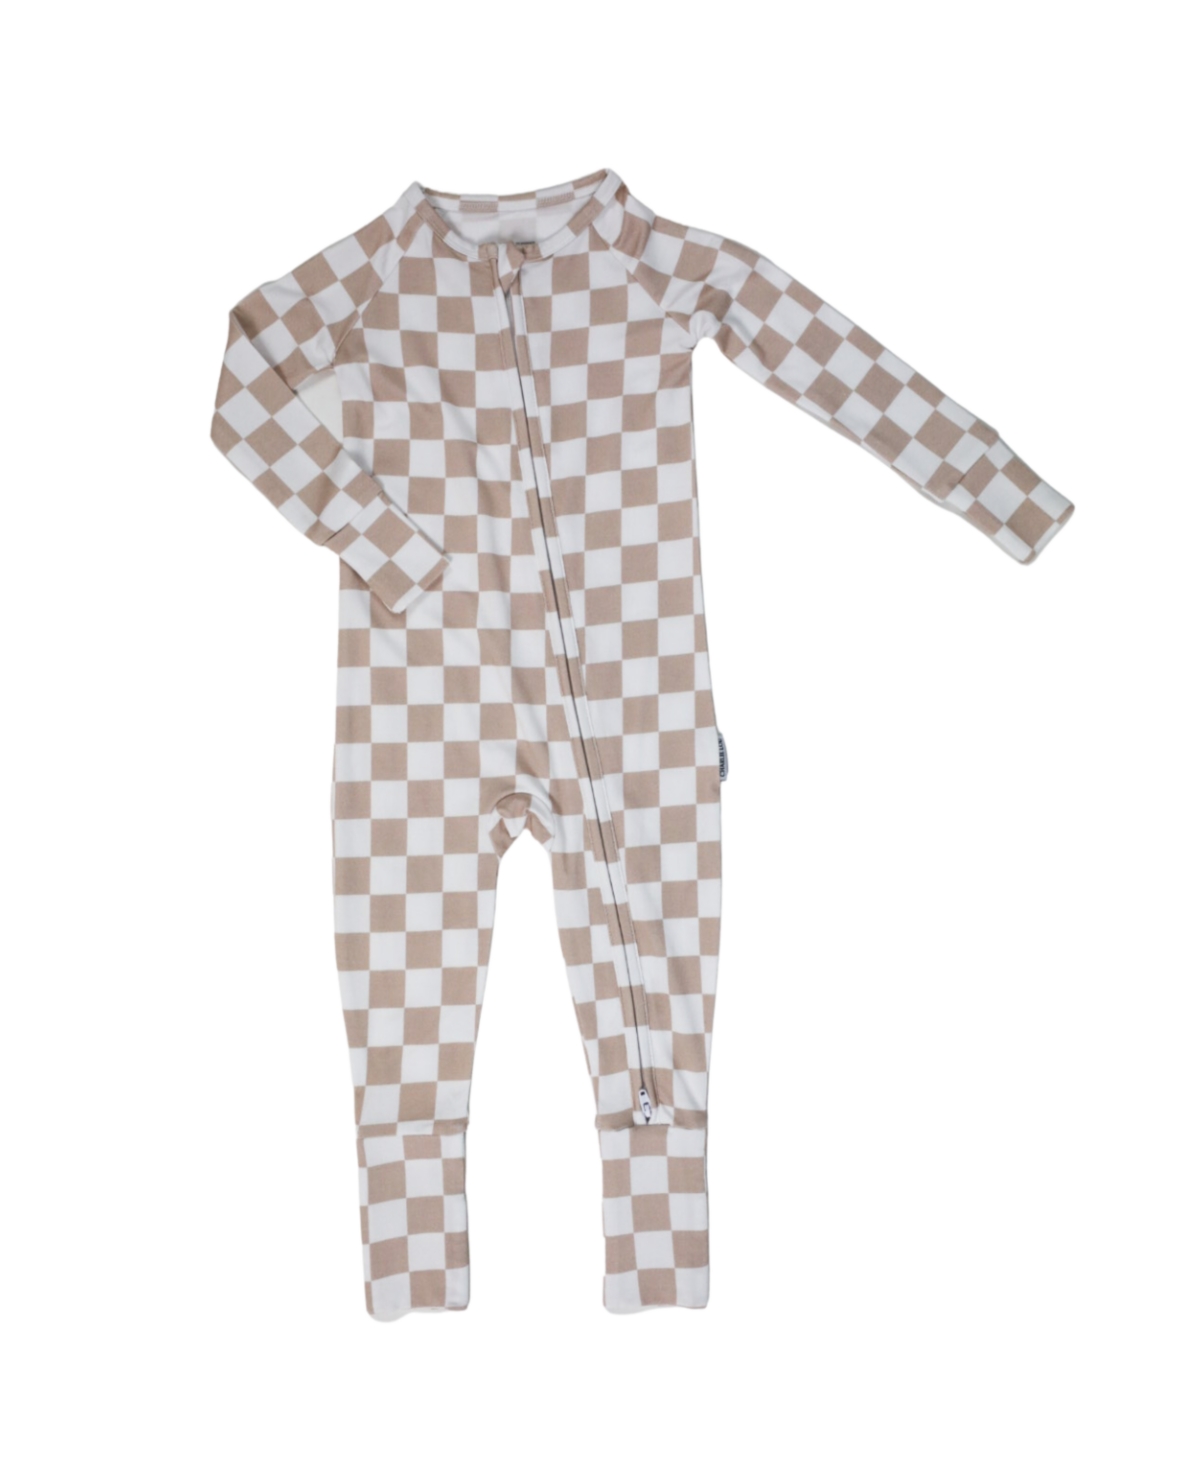 Charlie Lou Baby Unisex Checkered Romper - Baby In Checkered Beige